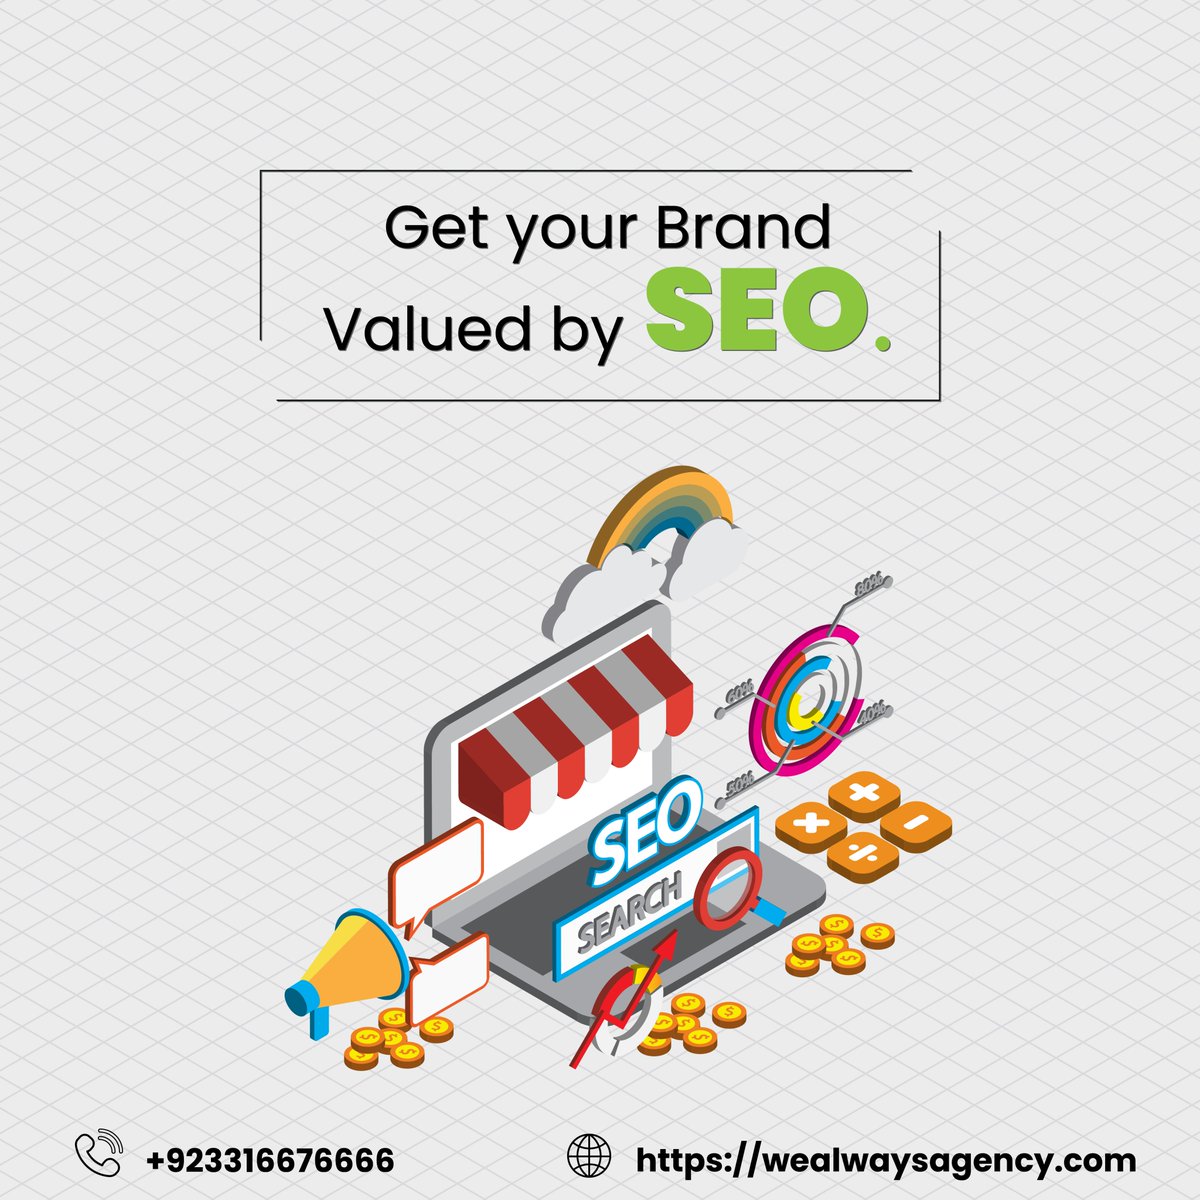 Embrace innovation and elevate your SEO experience today. Discover more at wealwaysagency.com and redefine your standard
#wealwaysagency #Wealwayspk #SEO #seoservices #seostratgy #YourBrand #QualityRedefined #InnovationUnleashed #ExploreNow #seoexpert #BrandElevation